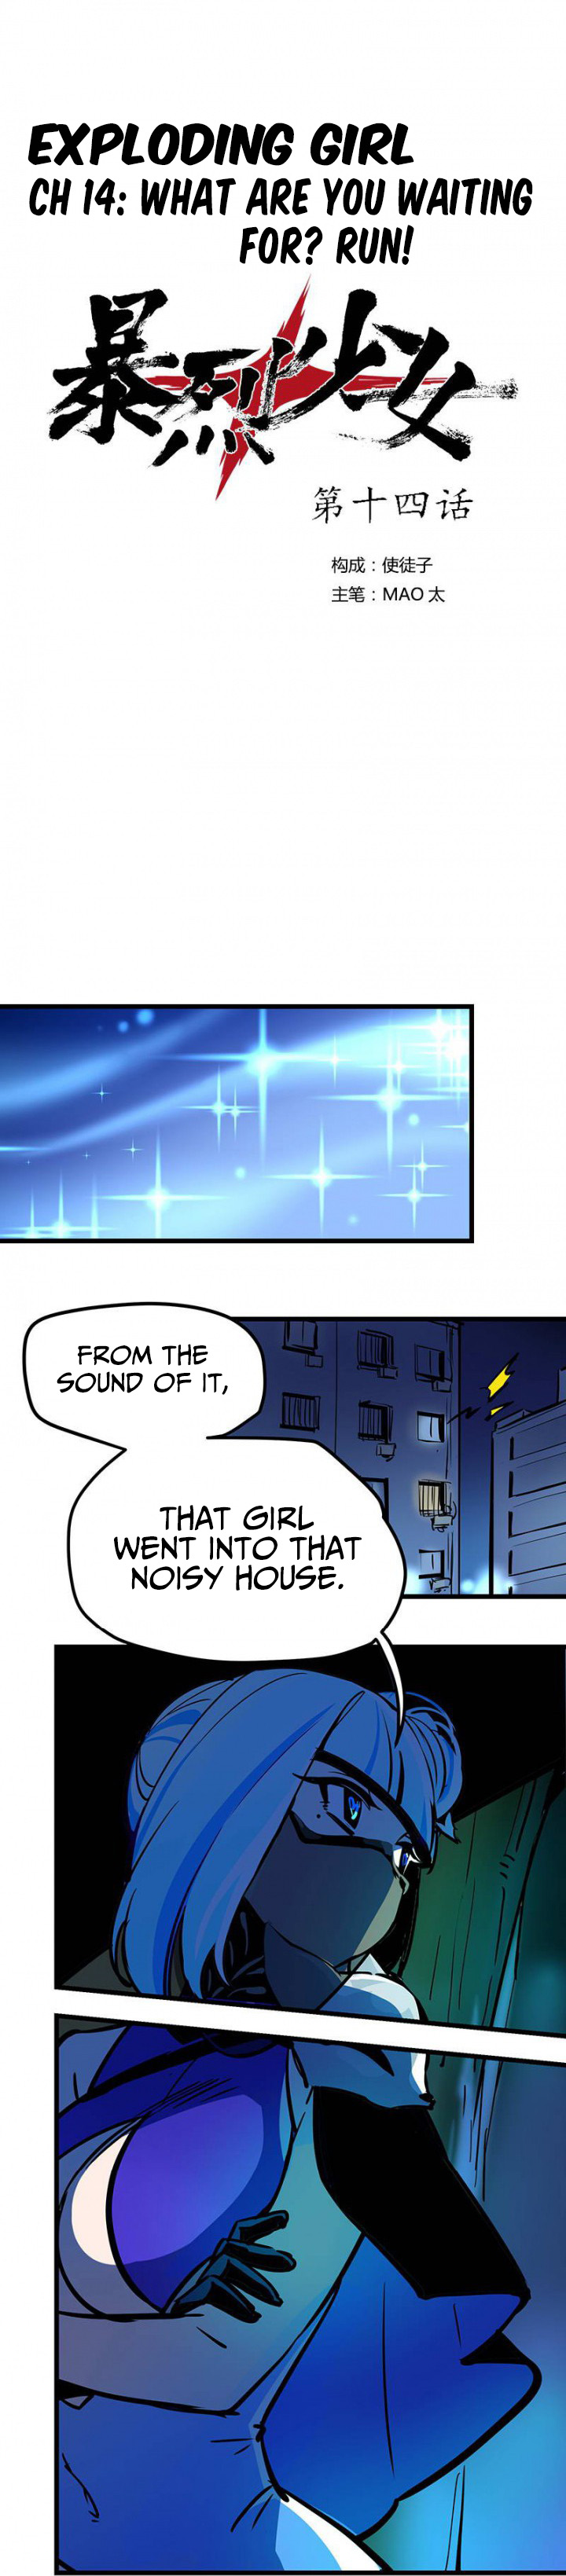 The Exploding Girl Ch. 14 What Are You Waiting For? Run!